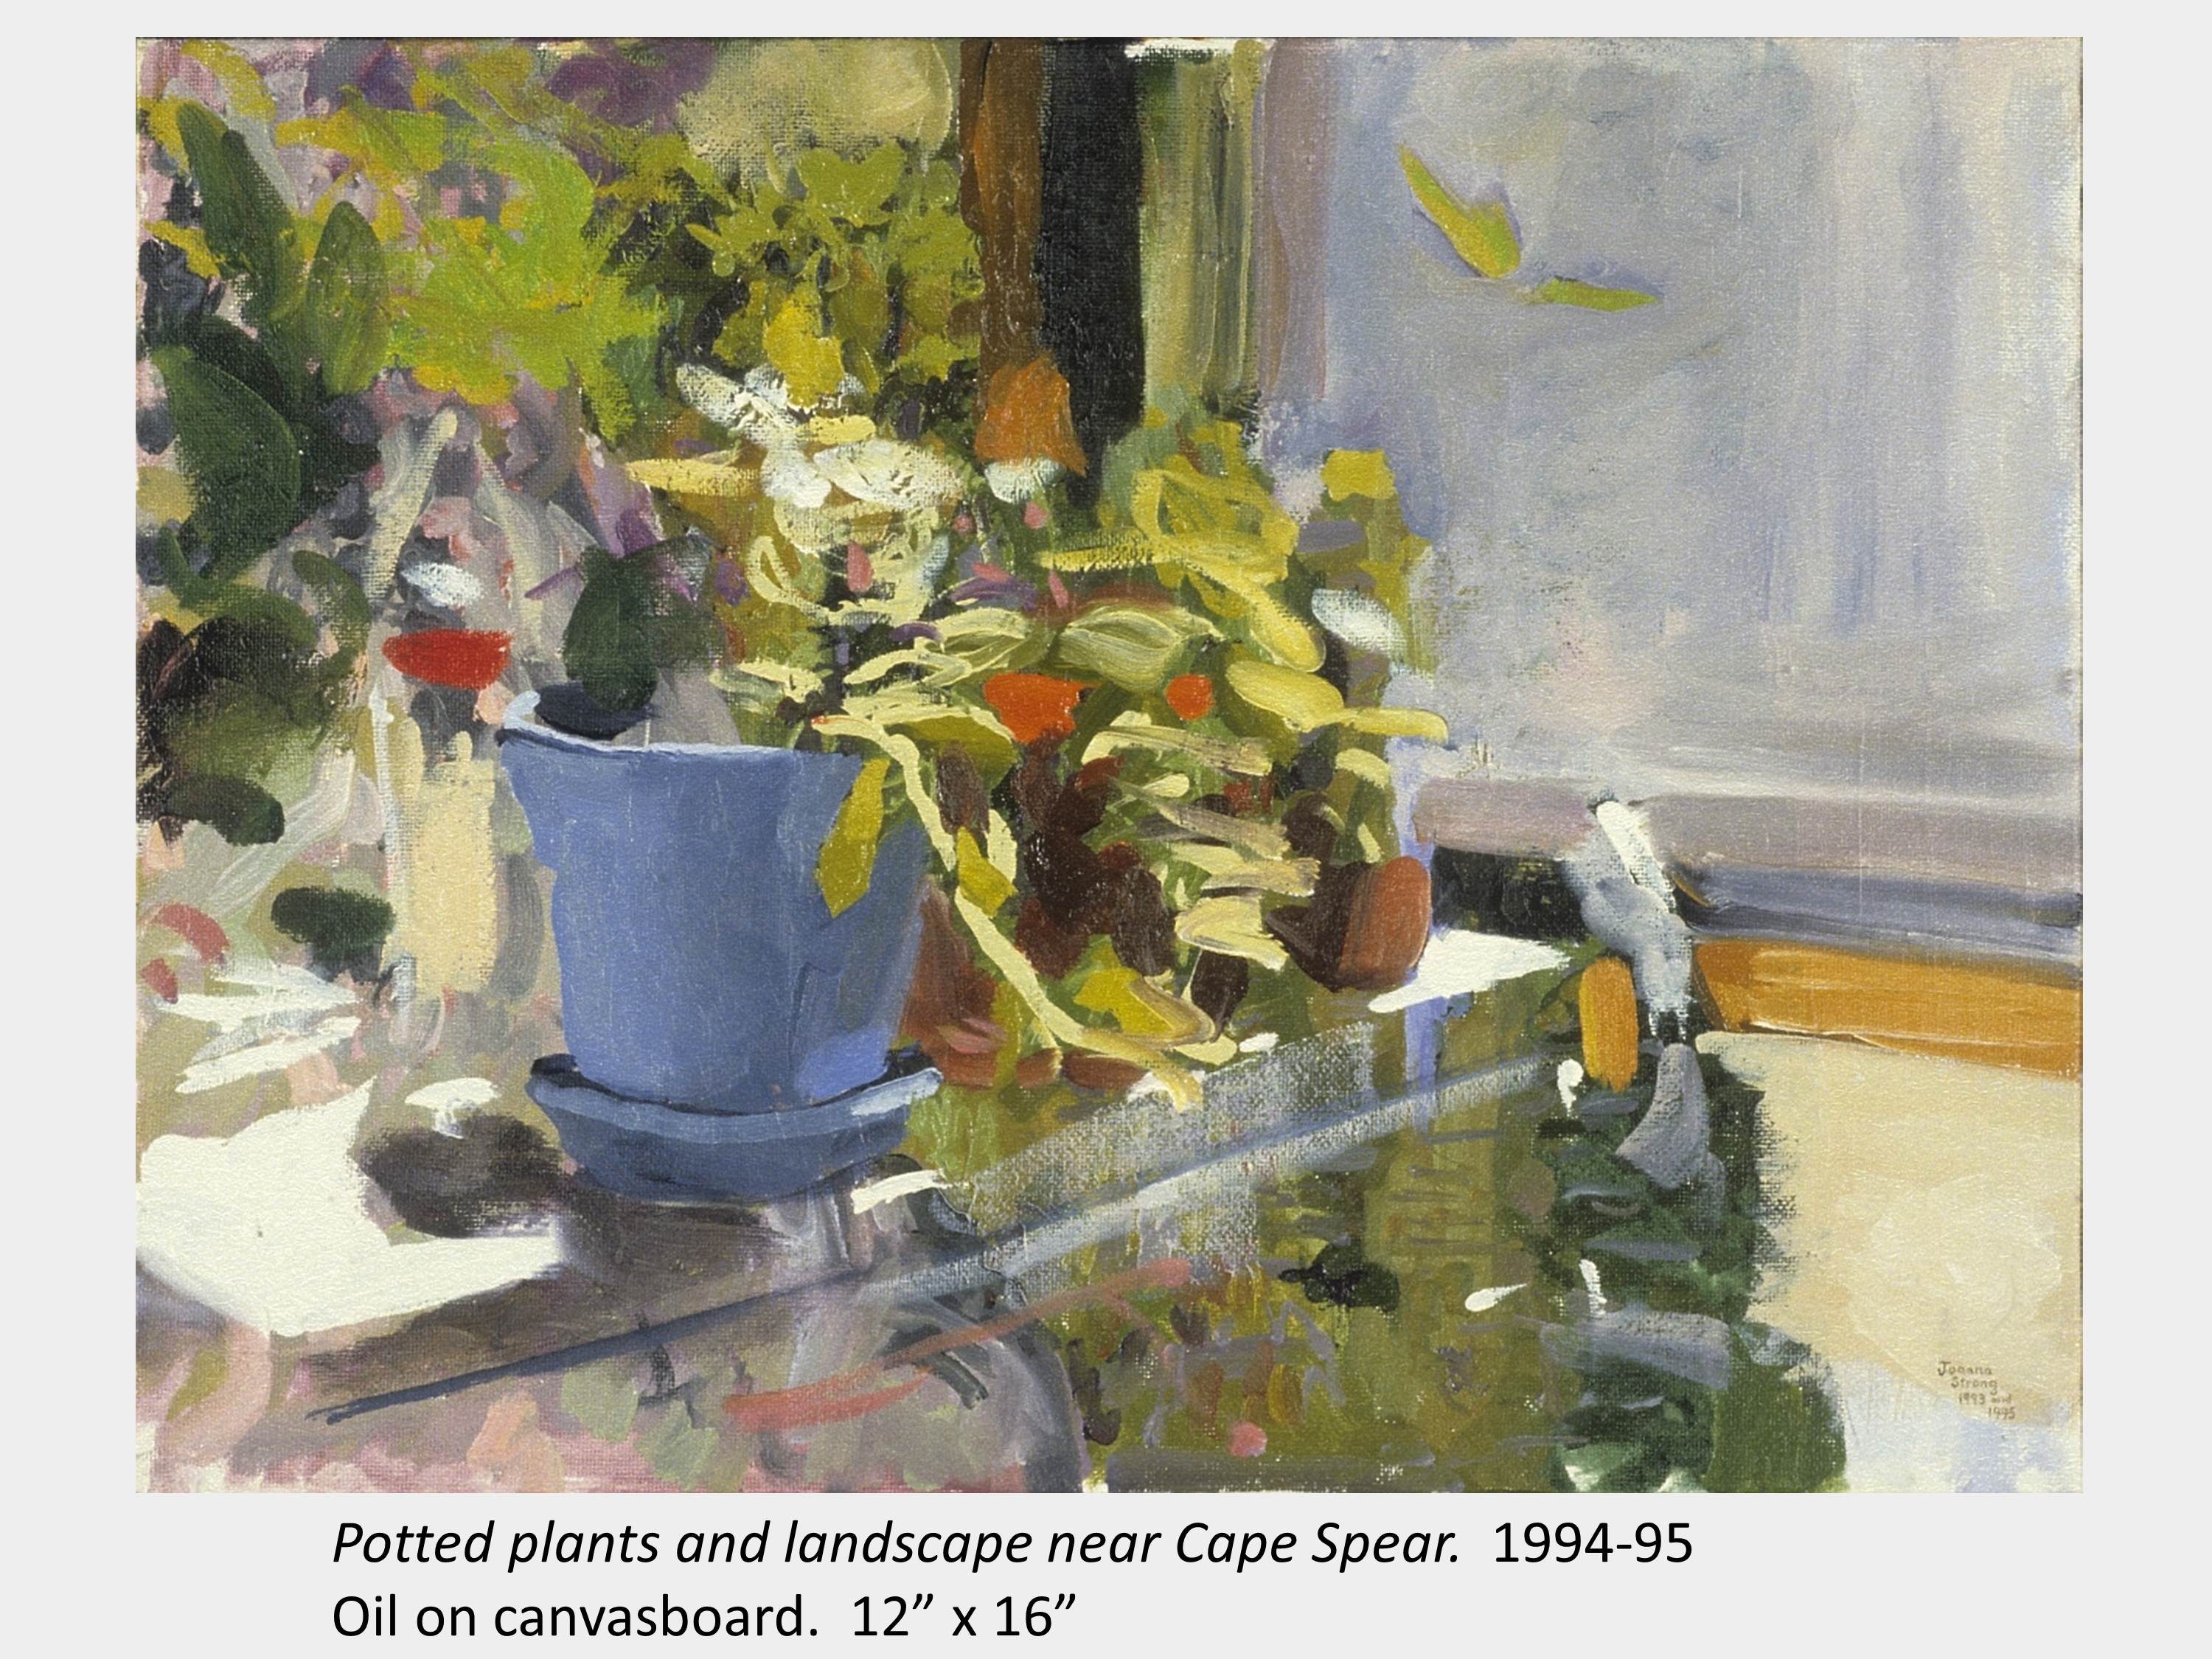 Artwork by Joanna Strong. Potted plants and landscape near Cape Spear. 1994-95. Oil on canvasboard. 12” x 16”